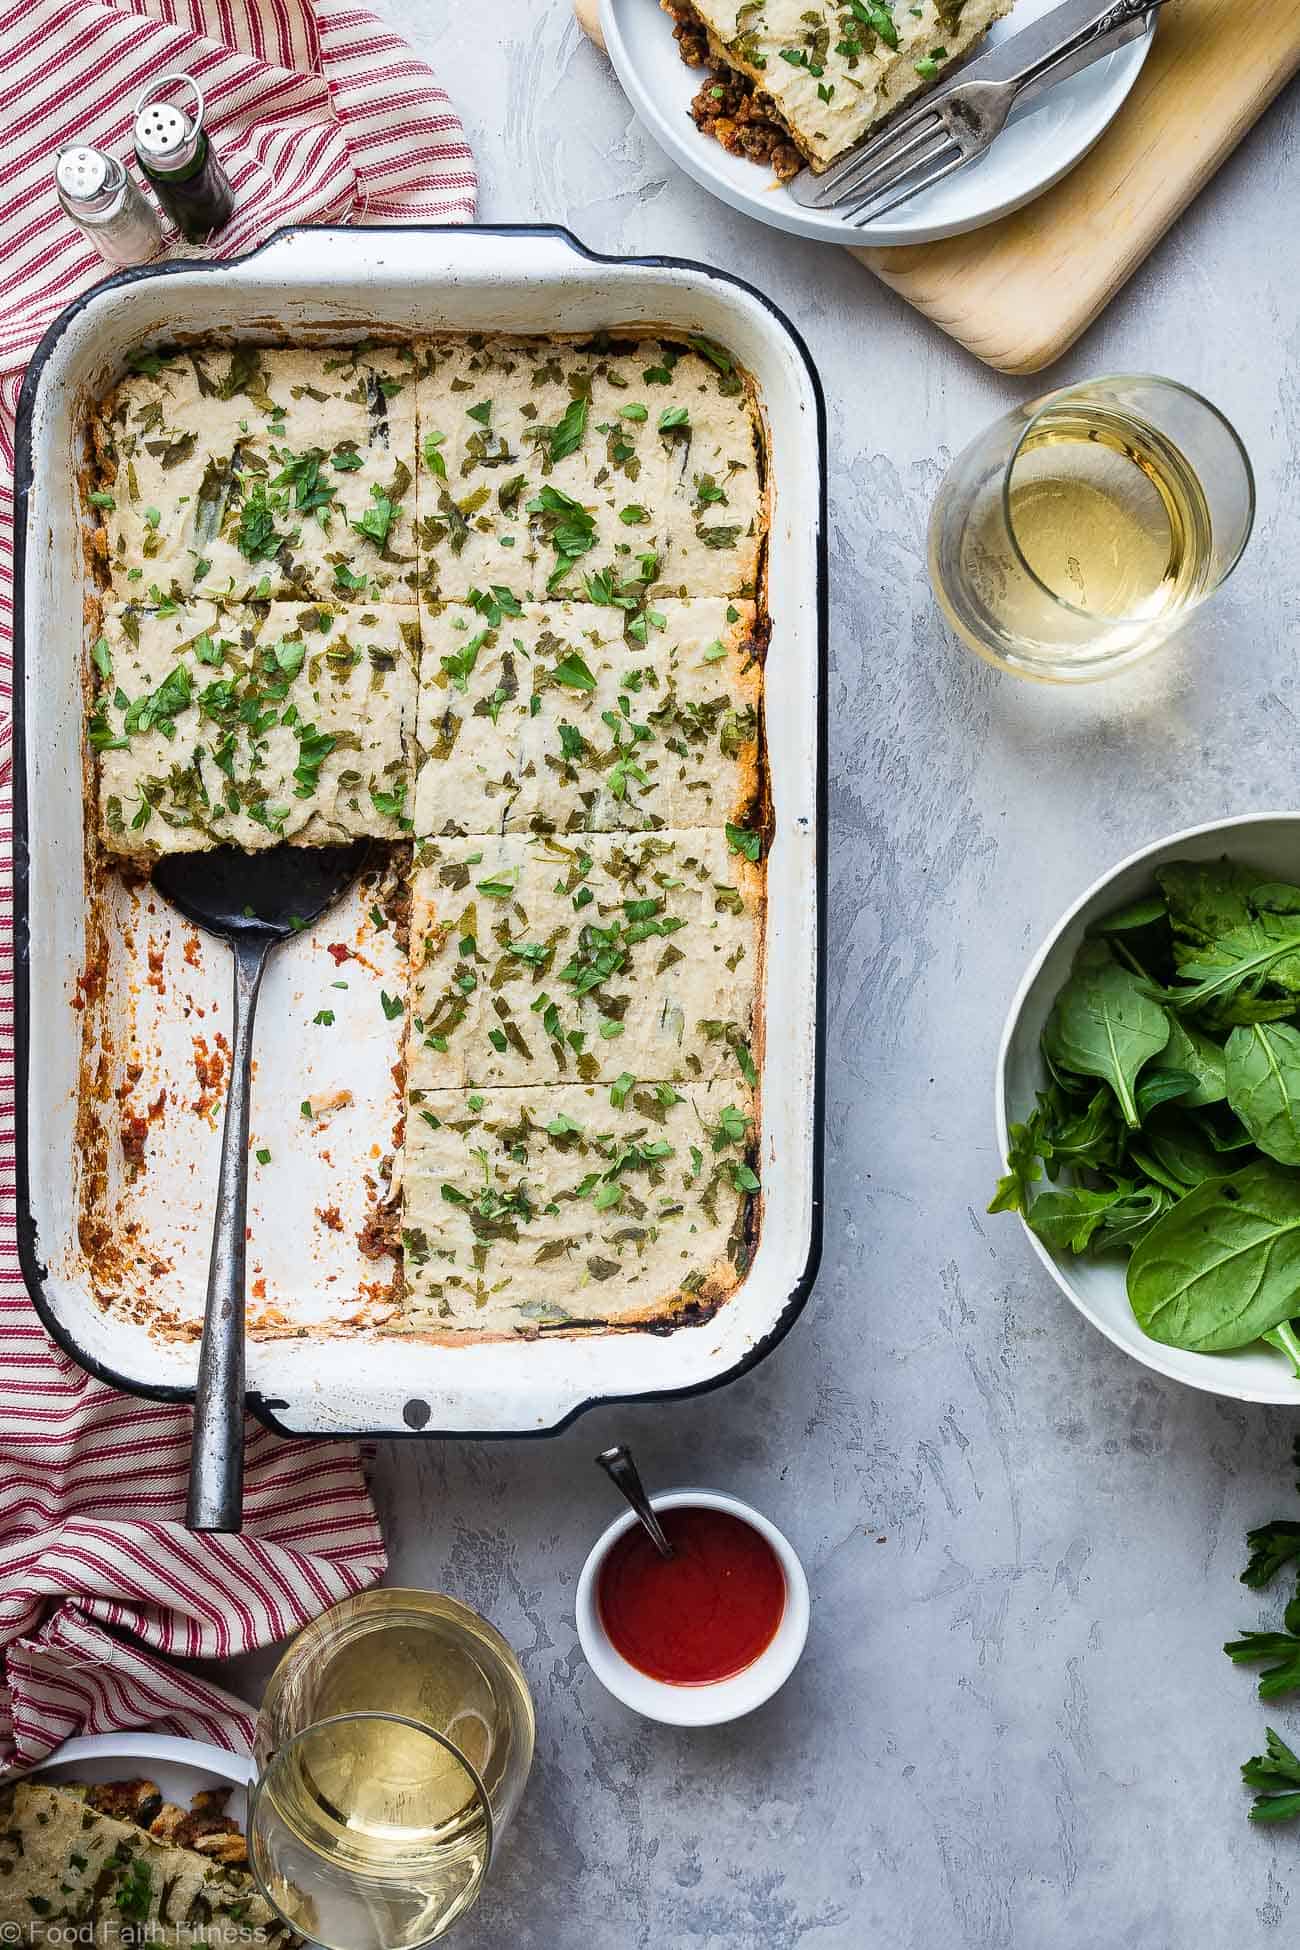 Low Carb Paleo Zucchini Lasagna - You will never know this family-pleasing lasagna is gluten/grain/dairy free, low carb and whole30 compliant! Not even the pickiest eaters will miss the cheese and pasta! | #Foodfaithfitness | #Paleo #whole30 #lowcarb #lasagna #glutenfree